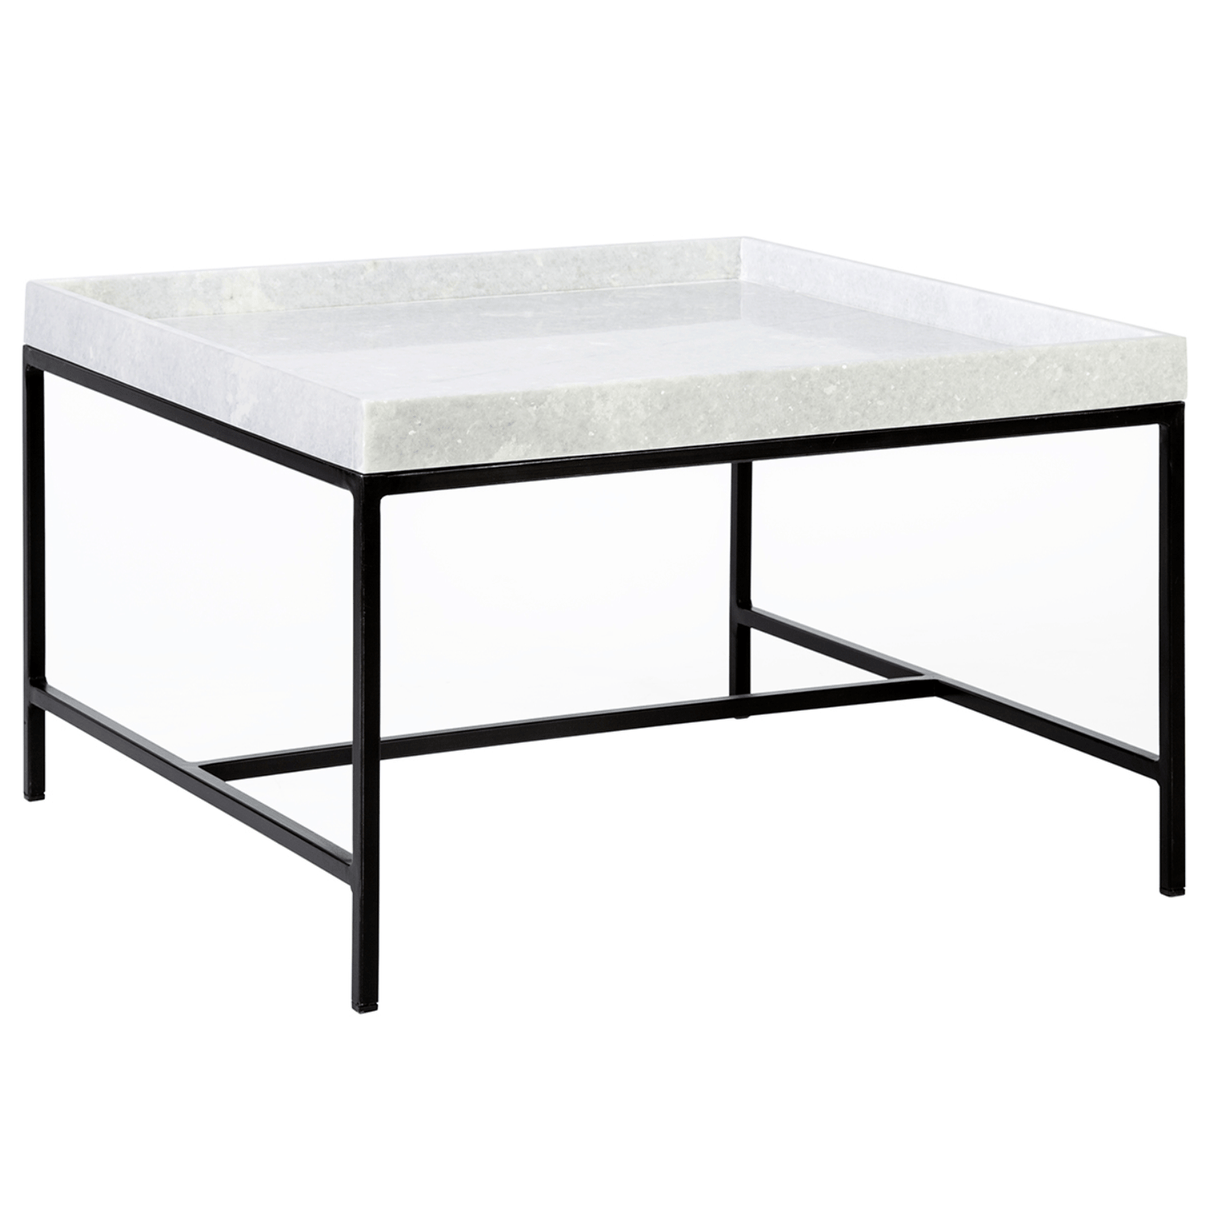 Dovetail Madsen Coffee Table Furniture dovetail-BB141